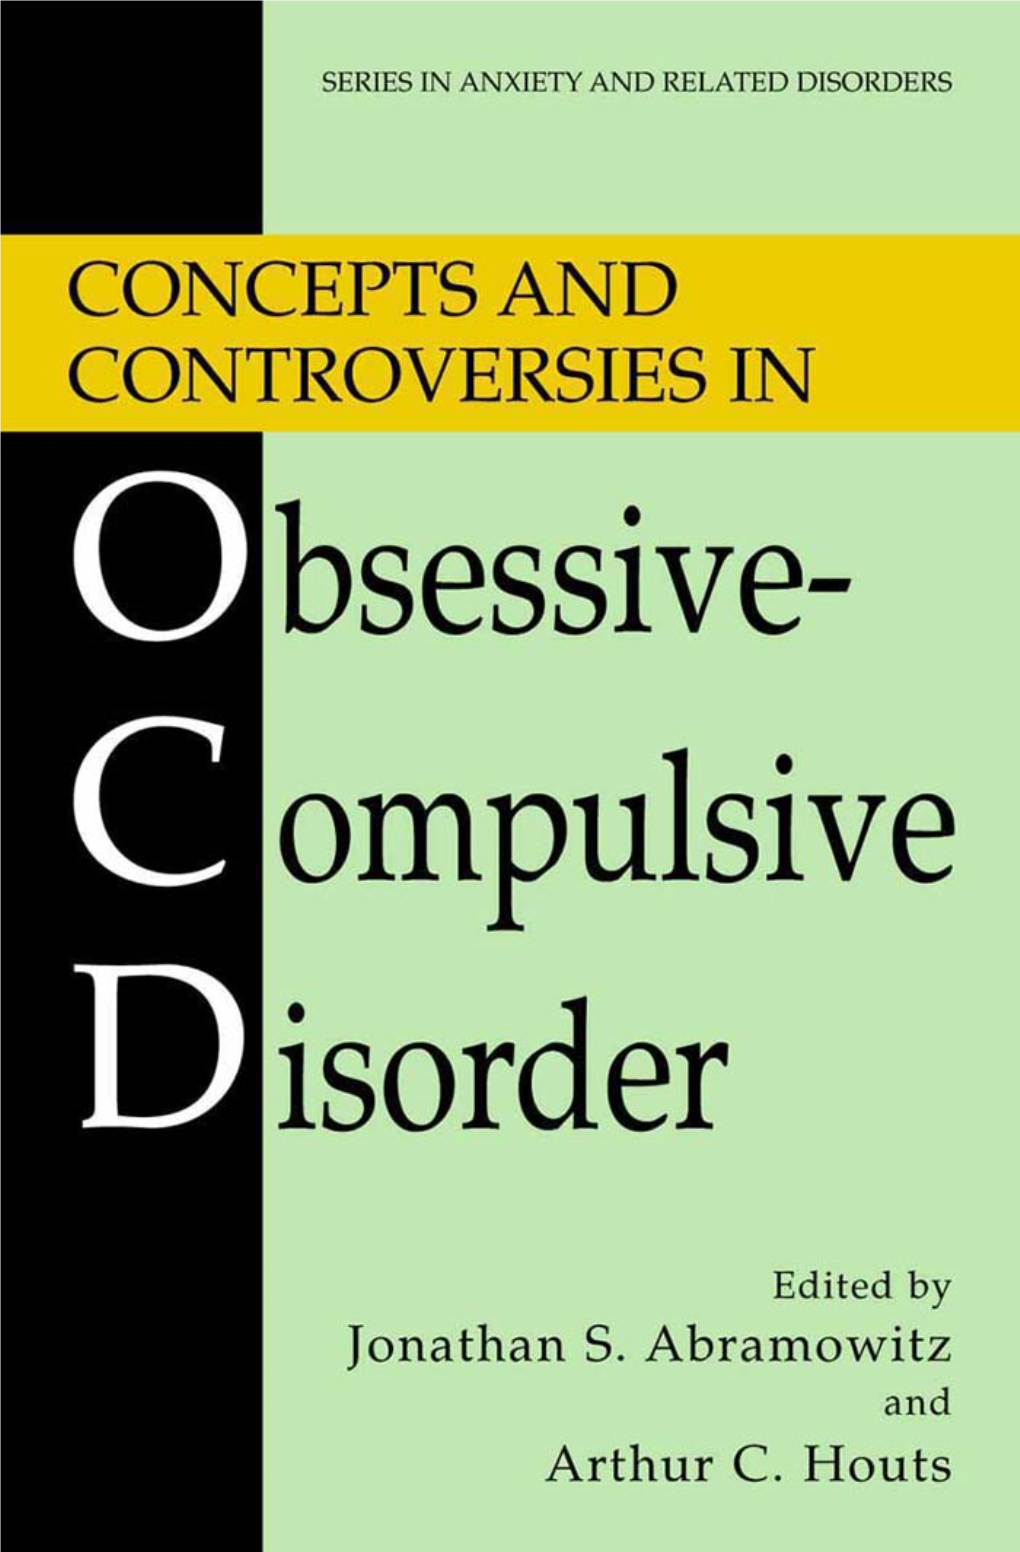 Concepts and Controversies in Obsessive-Compulsive Disorder SERIES in ANXIETY and RELATED DISORDERS Series Editor: Martin M